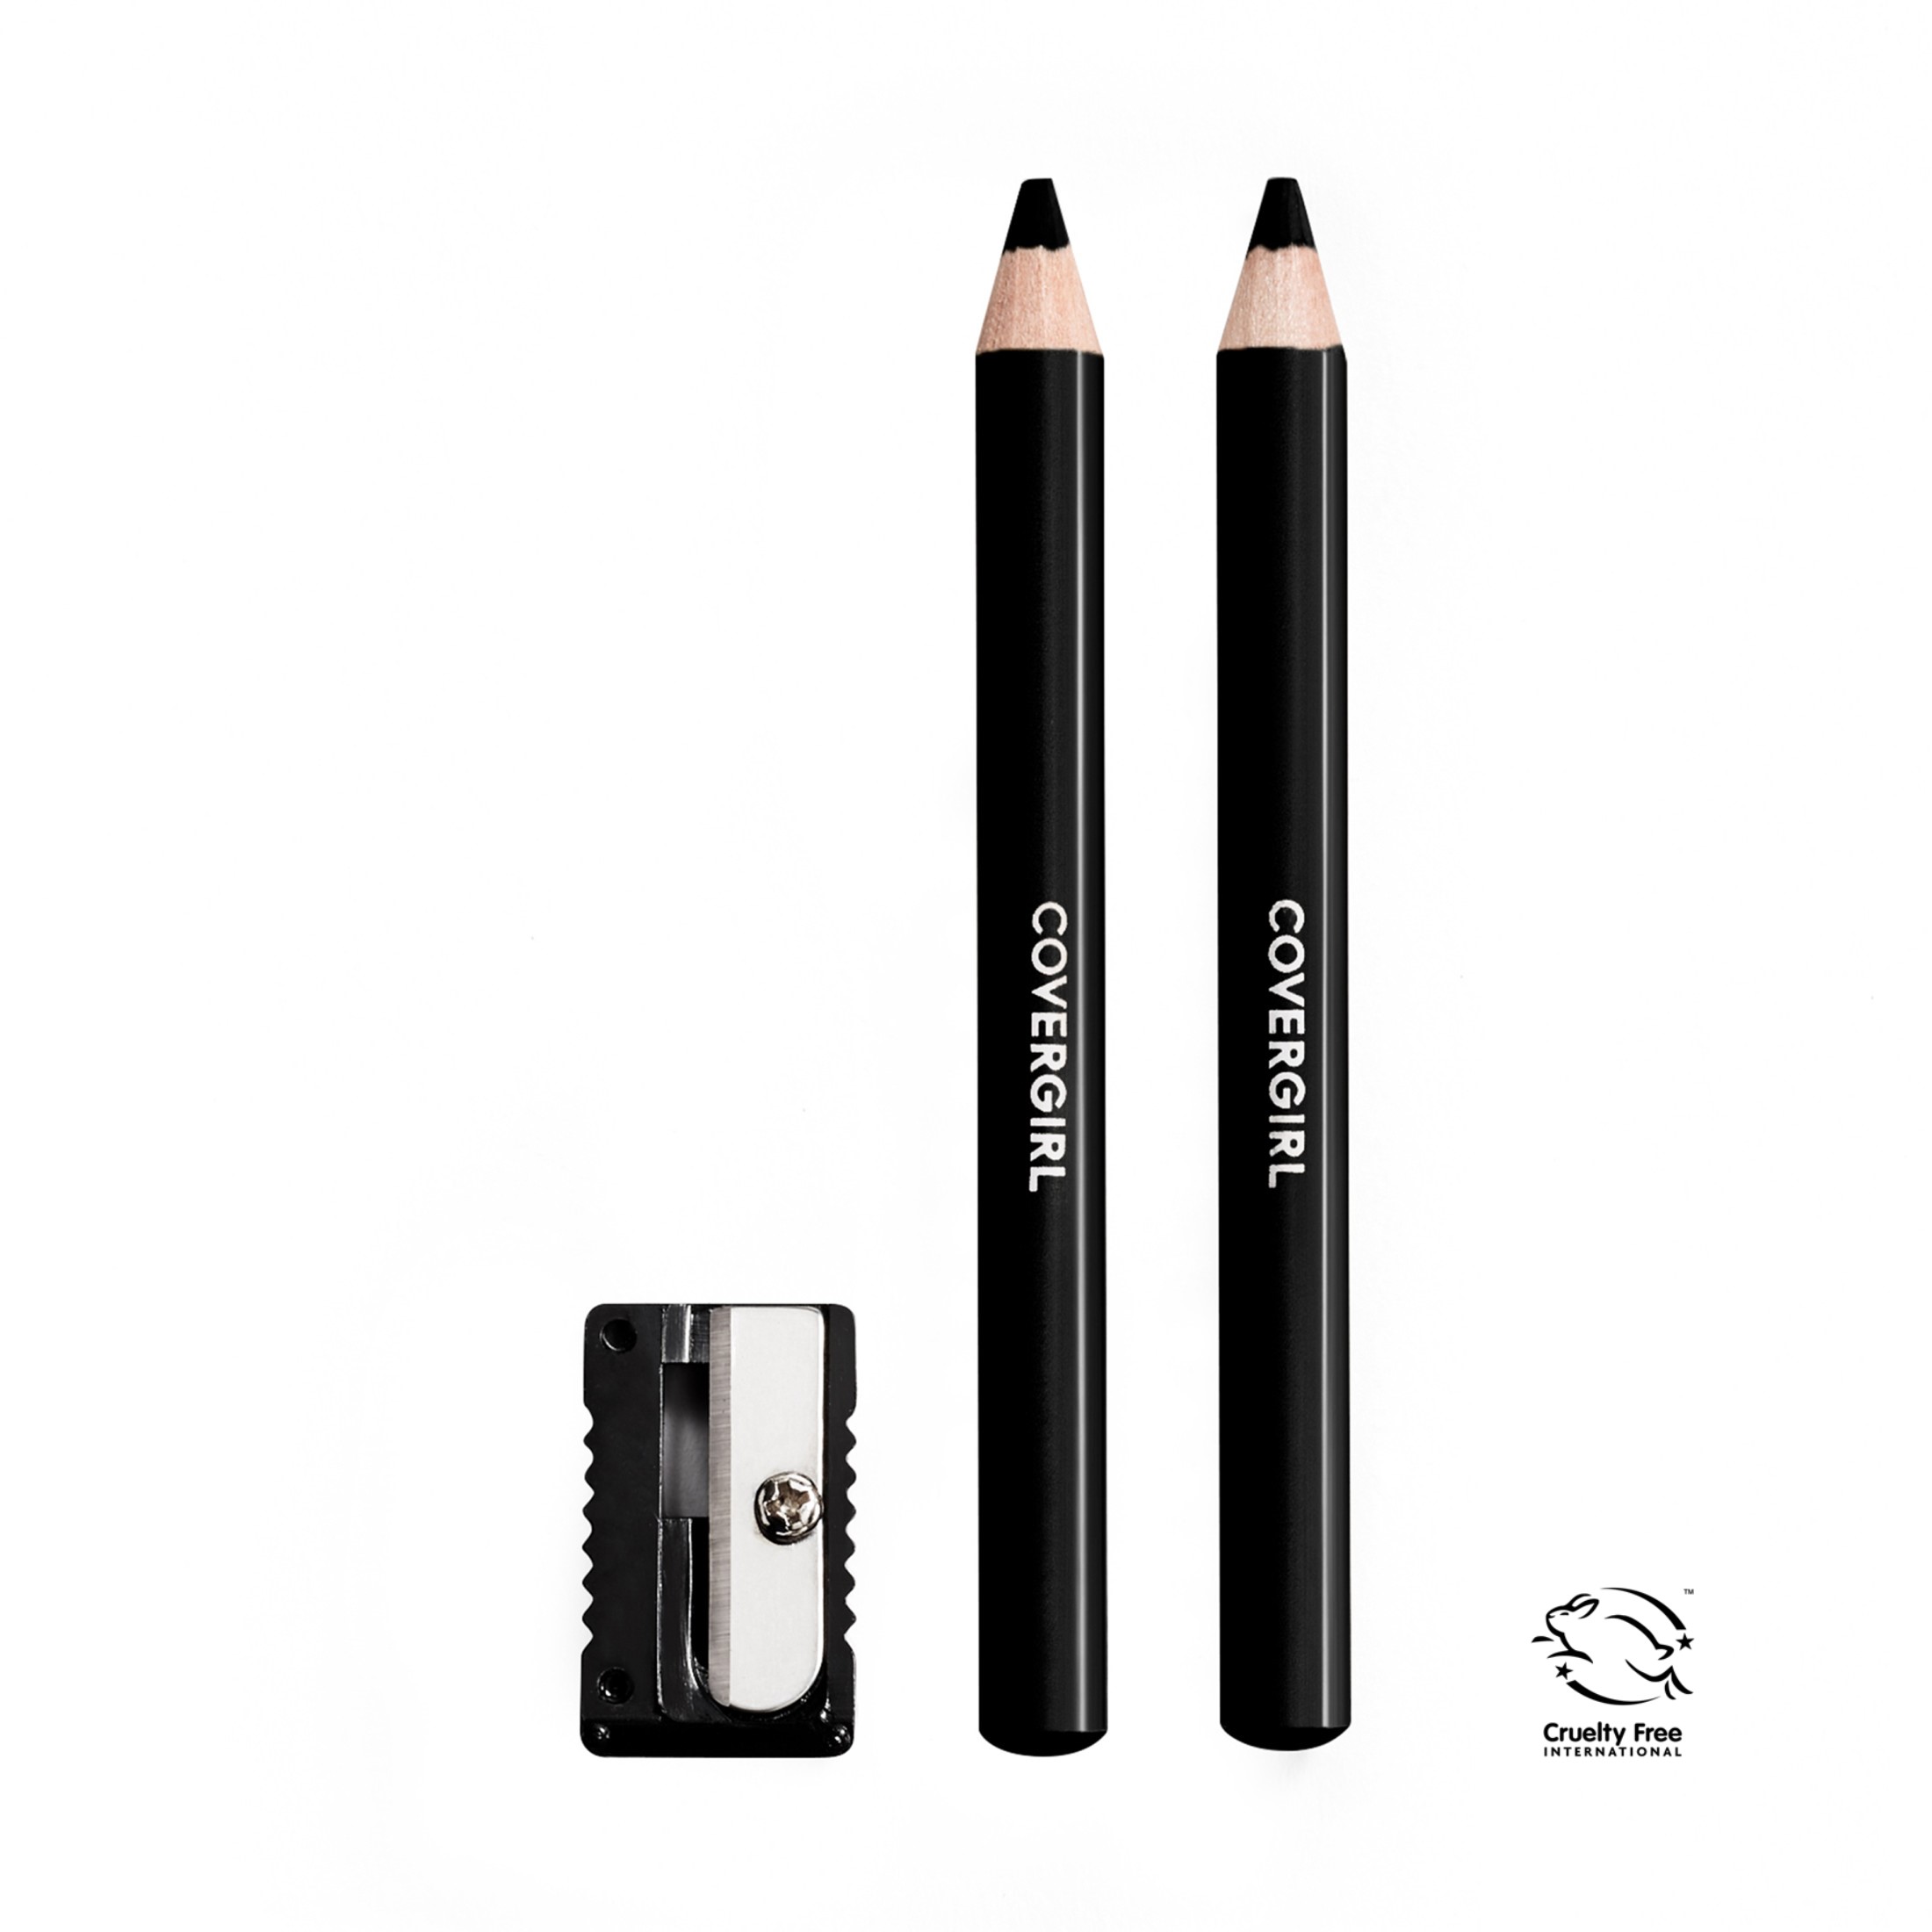 (2-Pack) COVERGIRL Easy Breezy Brow Fill + Define Eyebrow Pencil, 500 Black, 0.008 oz, Eye Pencil, Brown Eyebrow Pencil, Blendable Pencil Fill and Defined Brows, Sharpener Included - image 1 of 5